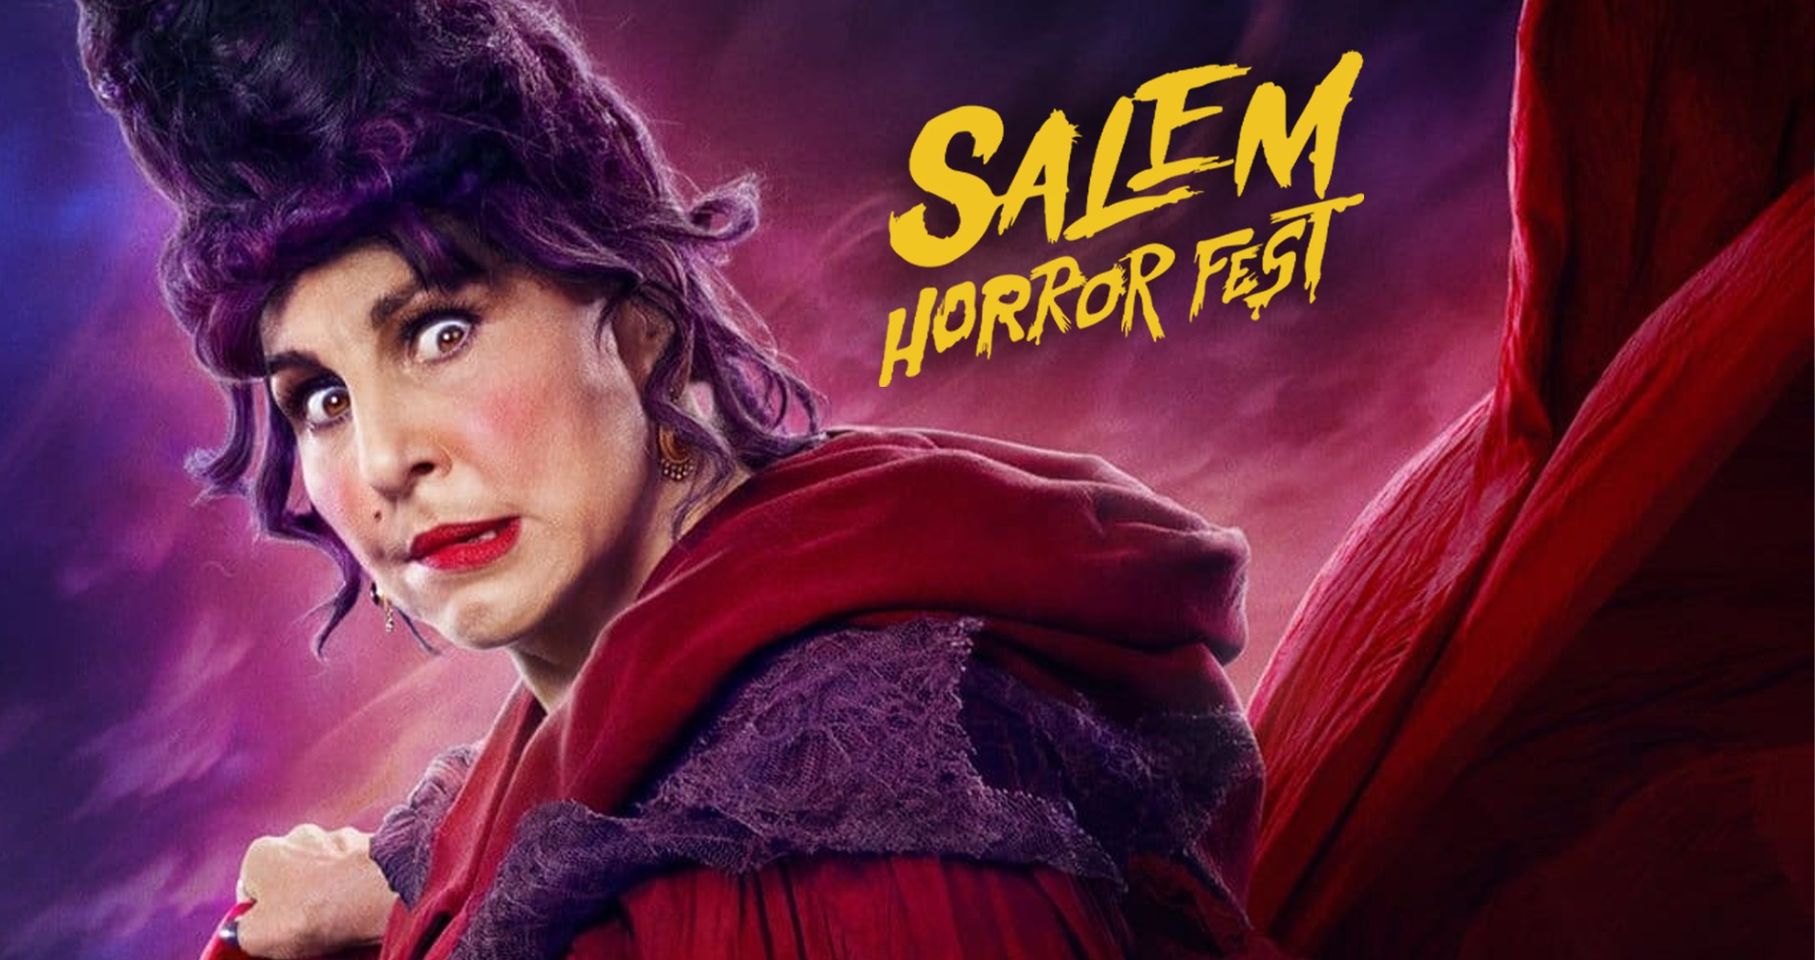 SEO-friendly description for Salem Horror Fest's exciting promotional image. The design features a surprised witch, set against an eye-catching background.